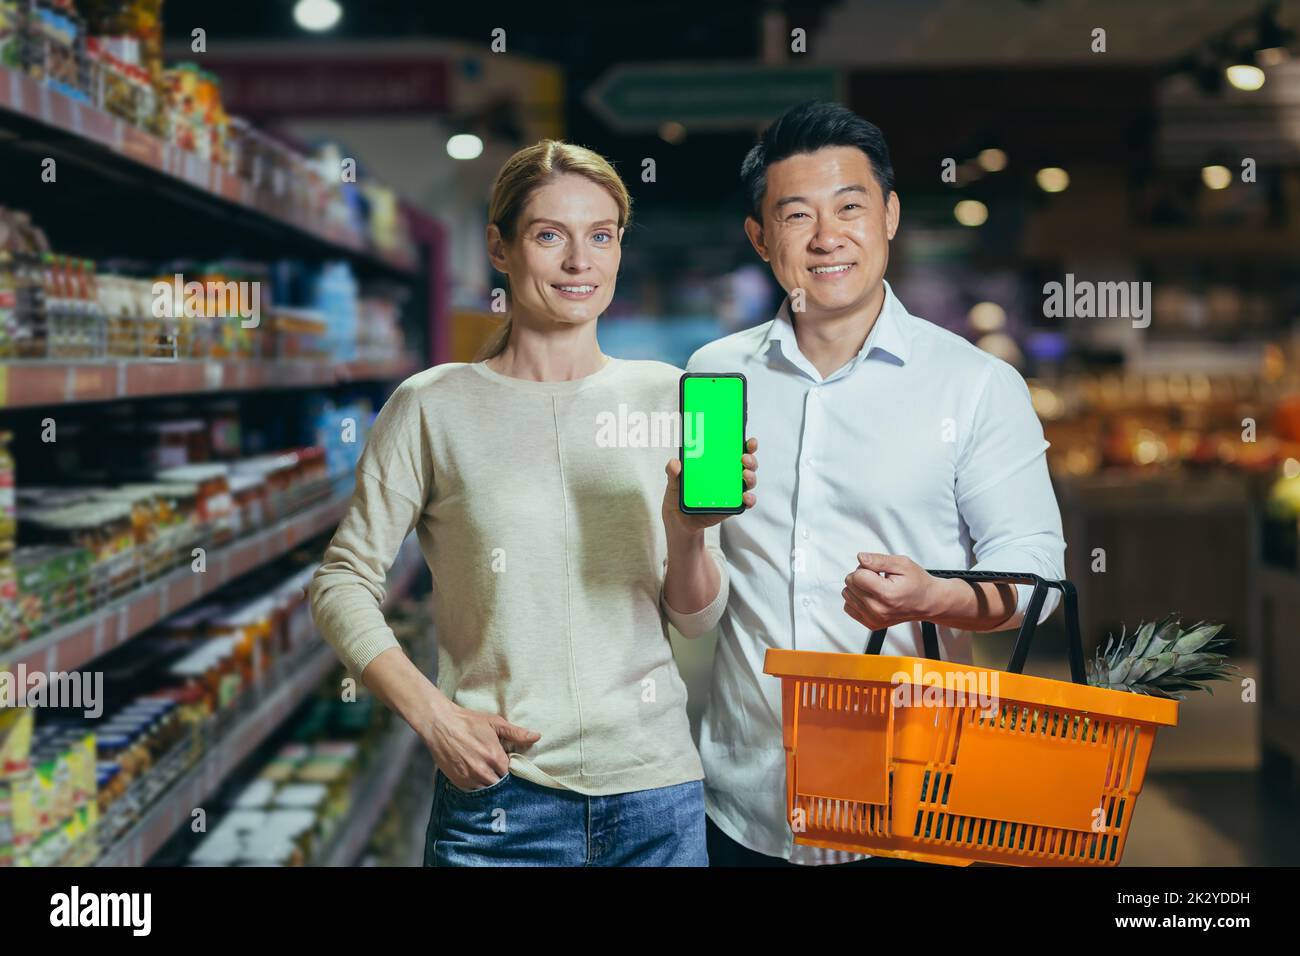 Young family diverse couple of shoppers in supermarket, smiling and looking at camera, grocery department, man and woman holding shopping basket and showing green screen of smartphone. Stock Photo